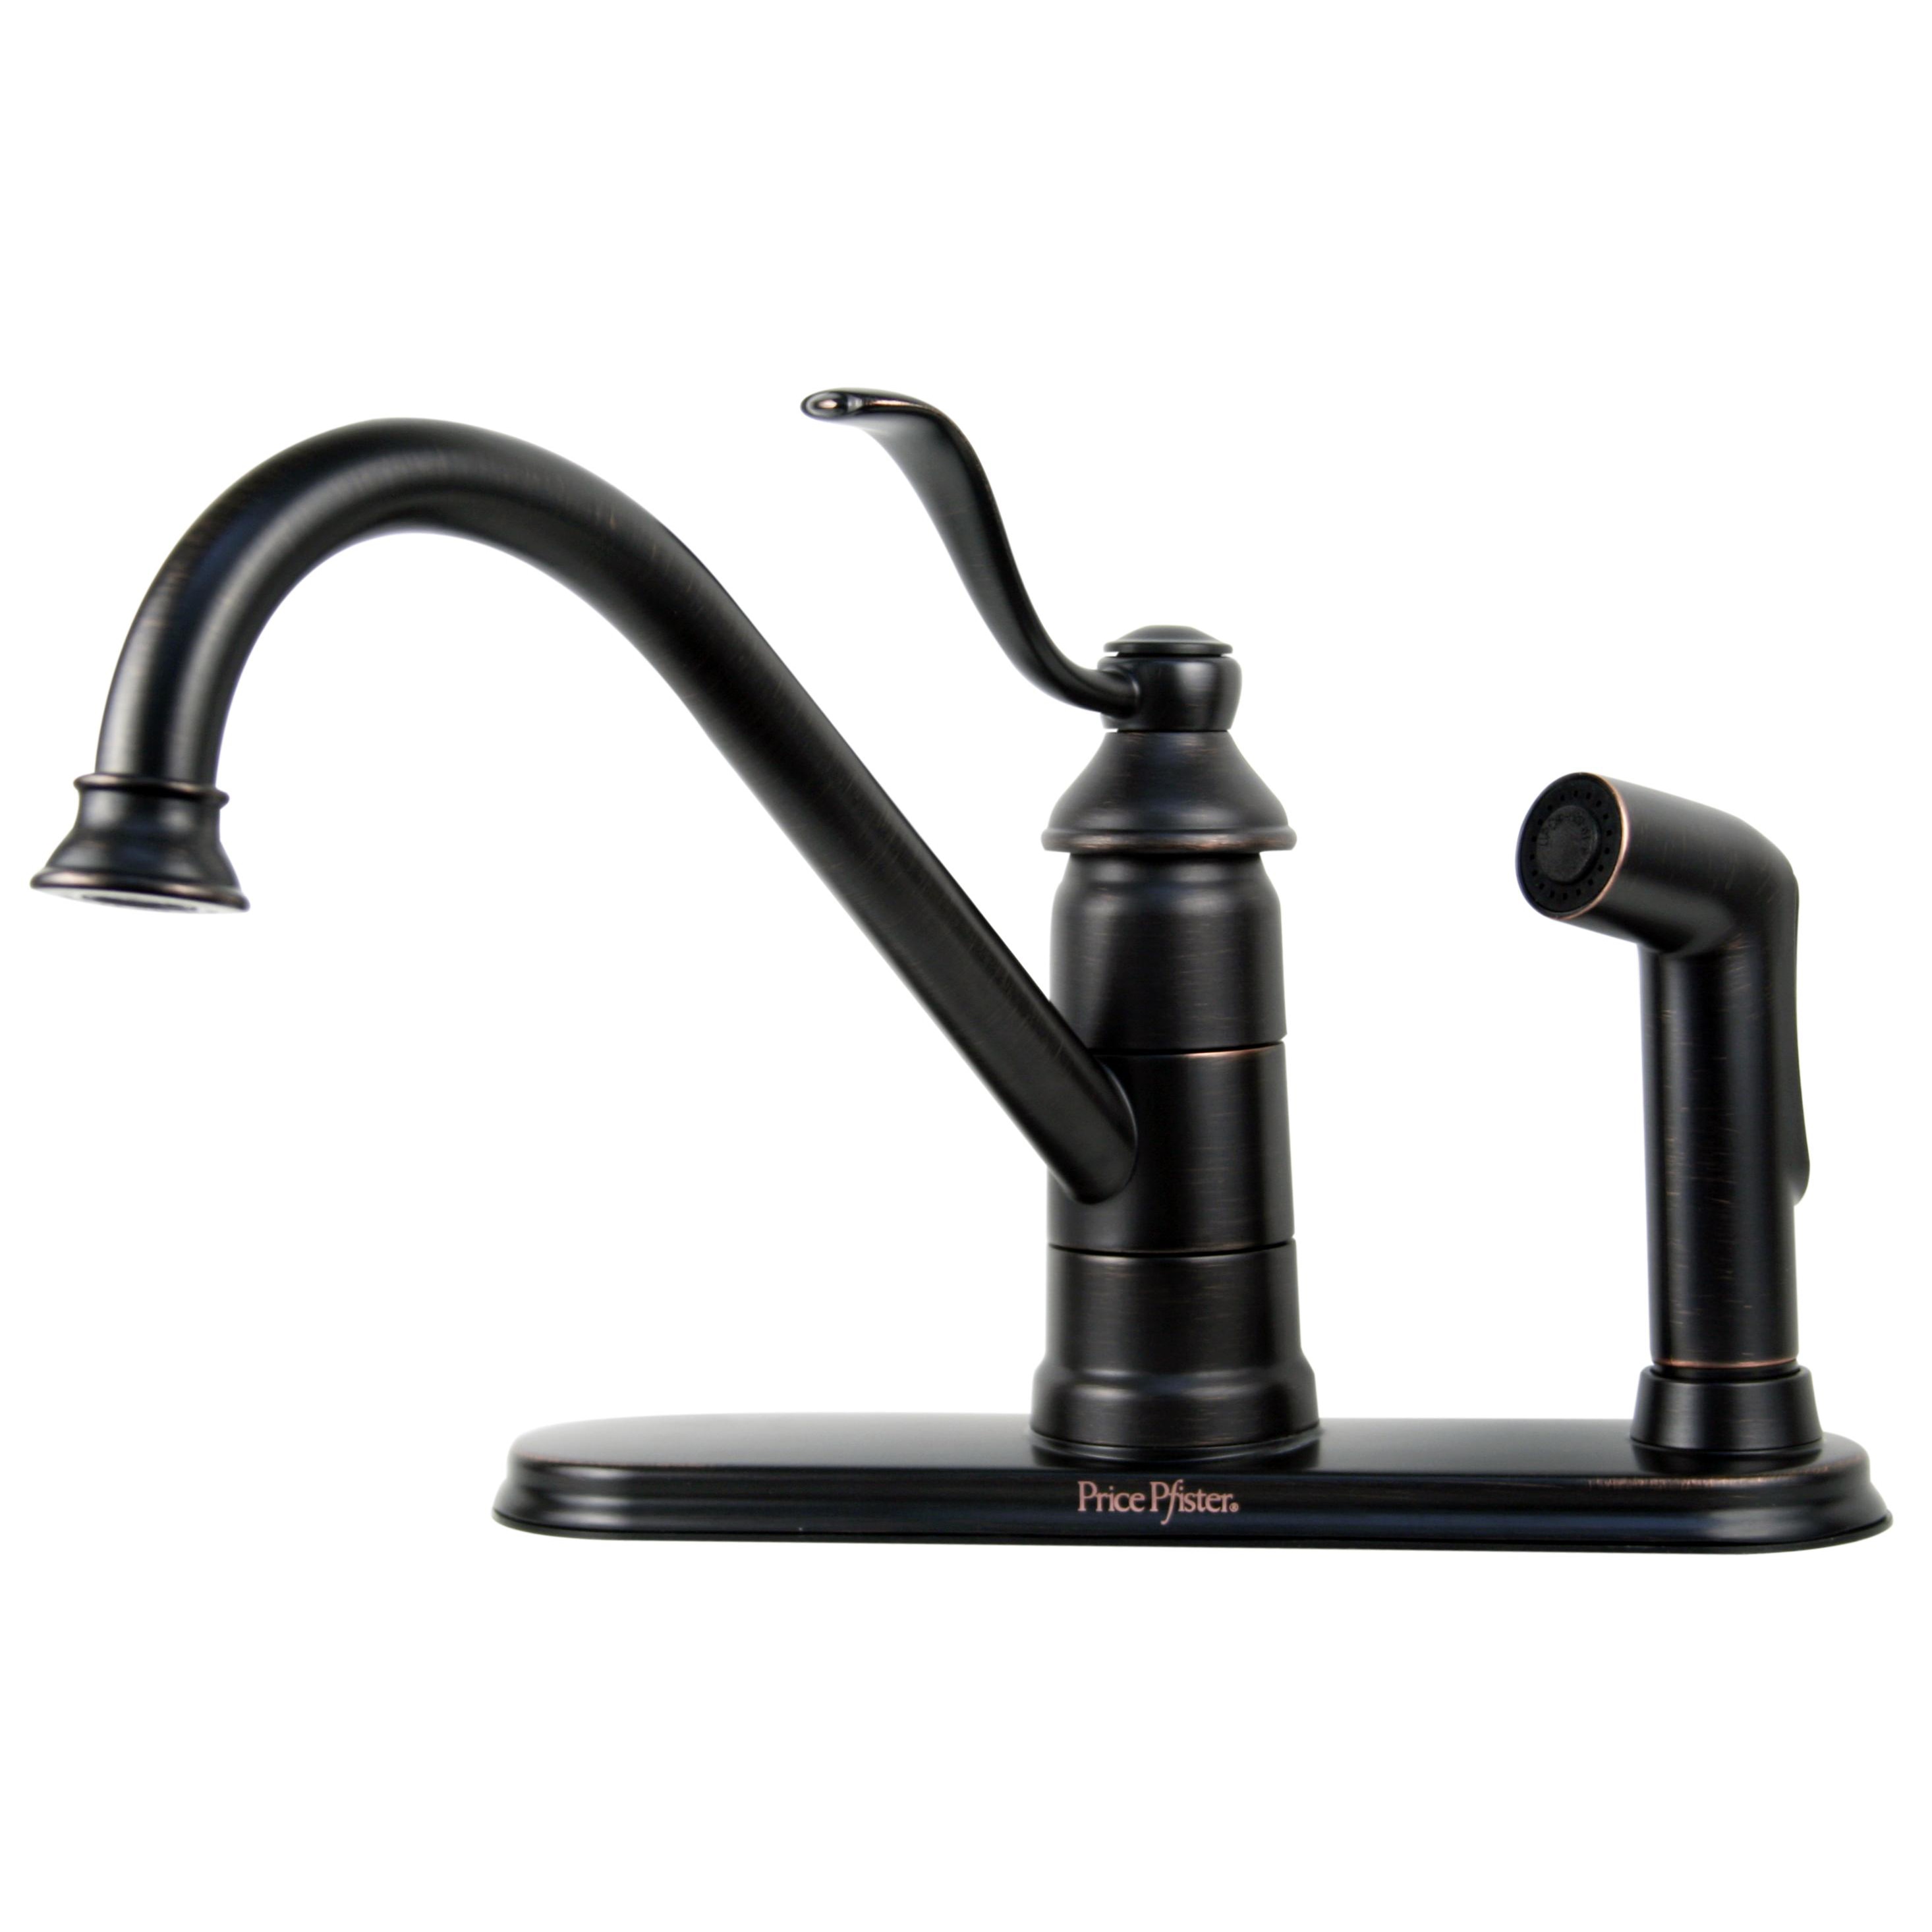 Price Pfister Portland Tuscan Bronze Kitchen Faucet with Spray